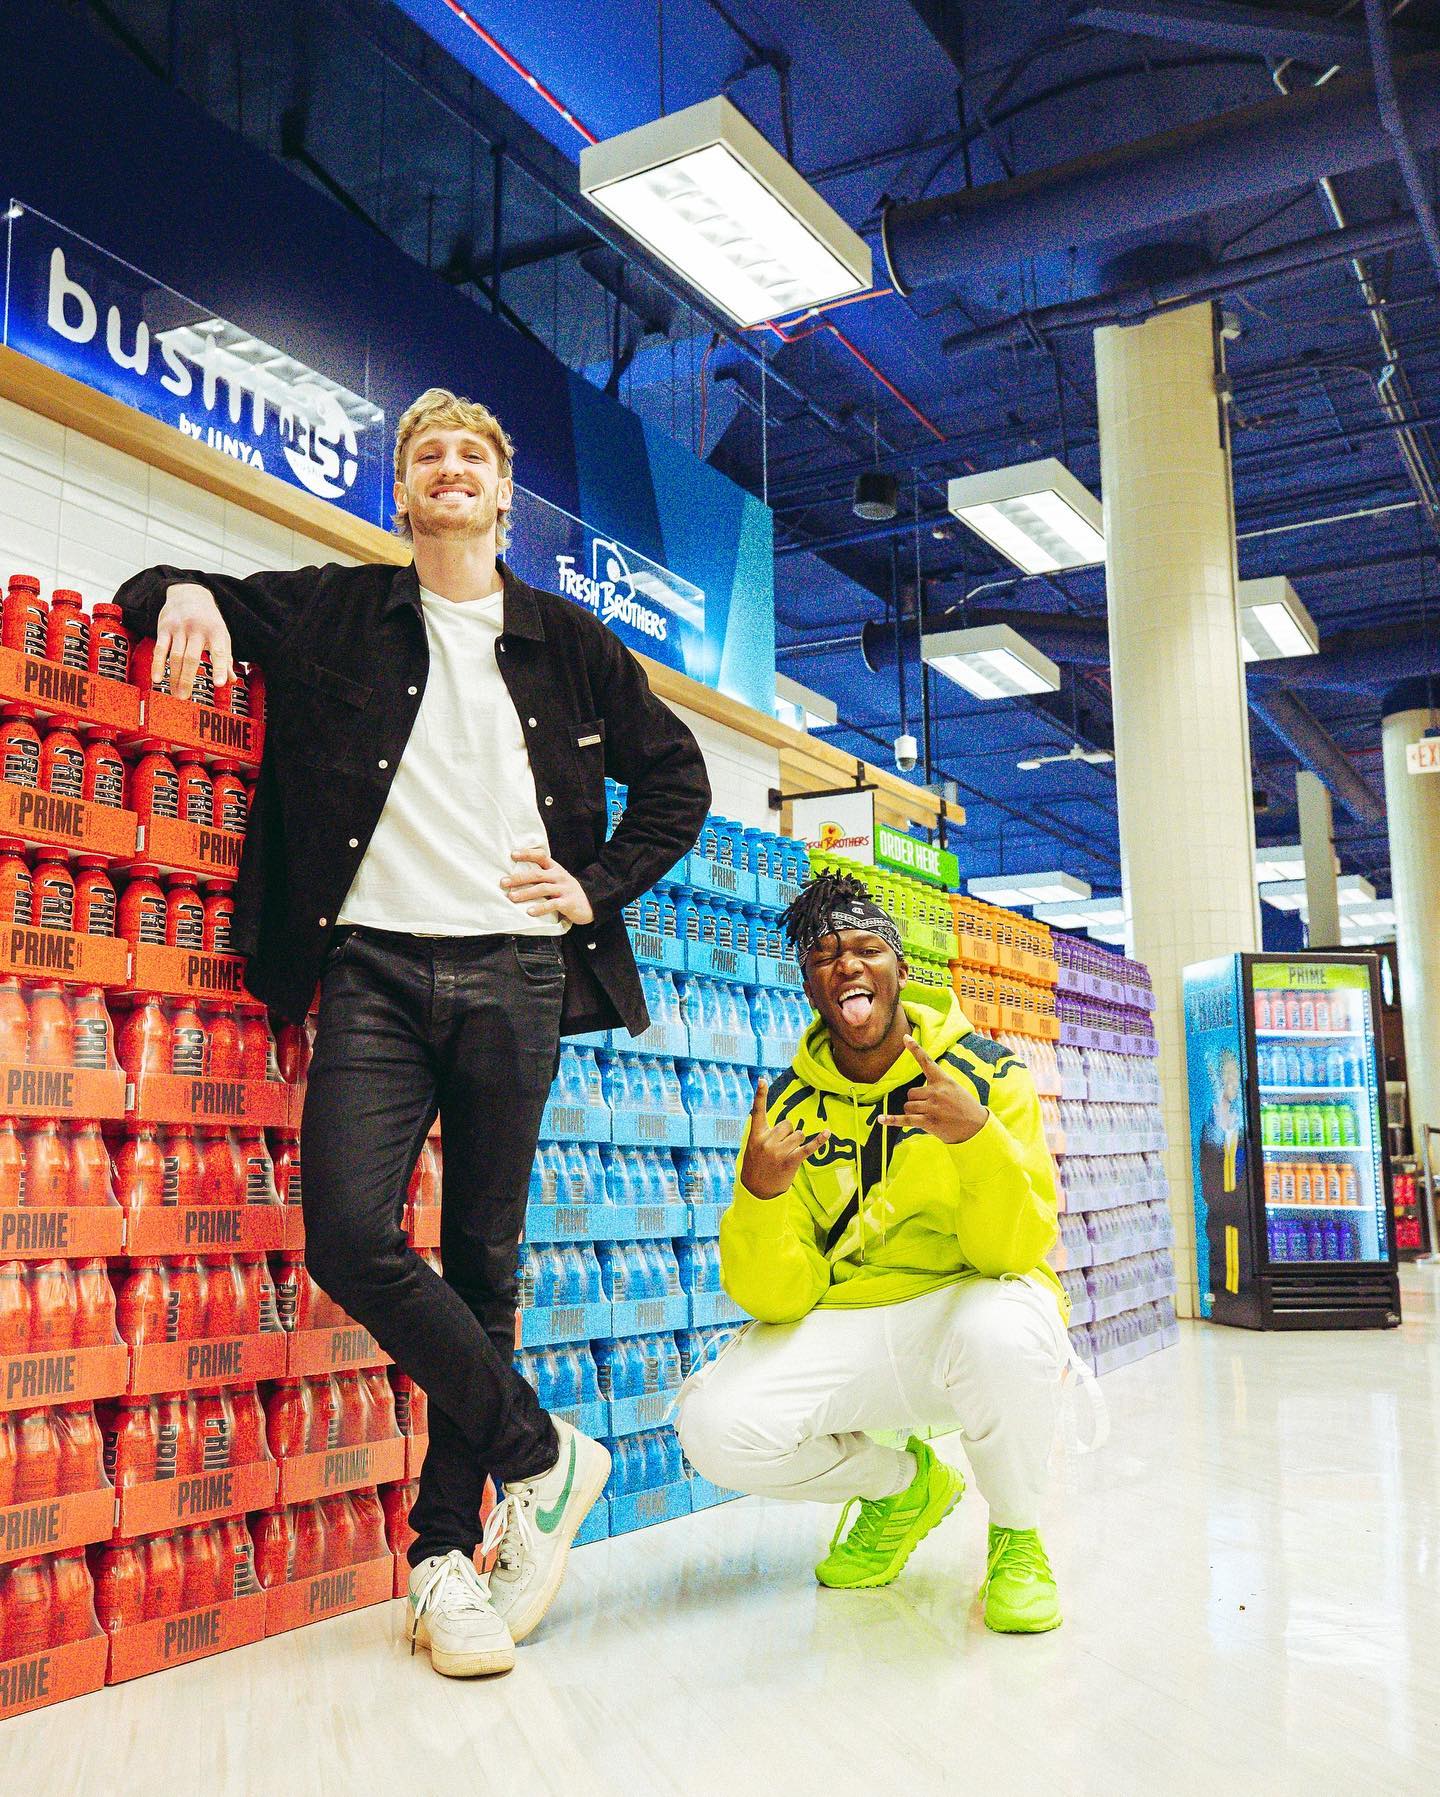 Logan Paul humiliates Gatorade: 'That's what your mom said'- KSI and Logan Paul's PRIME Drink continues competing with Gatorade